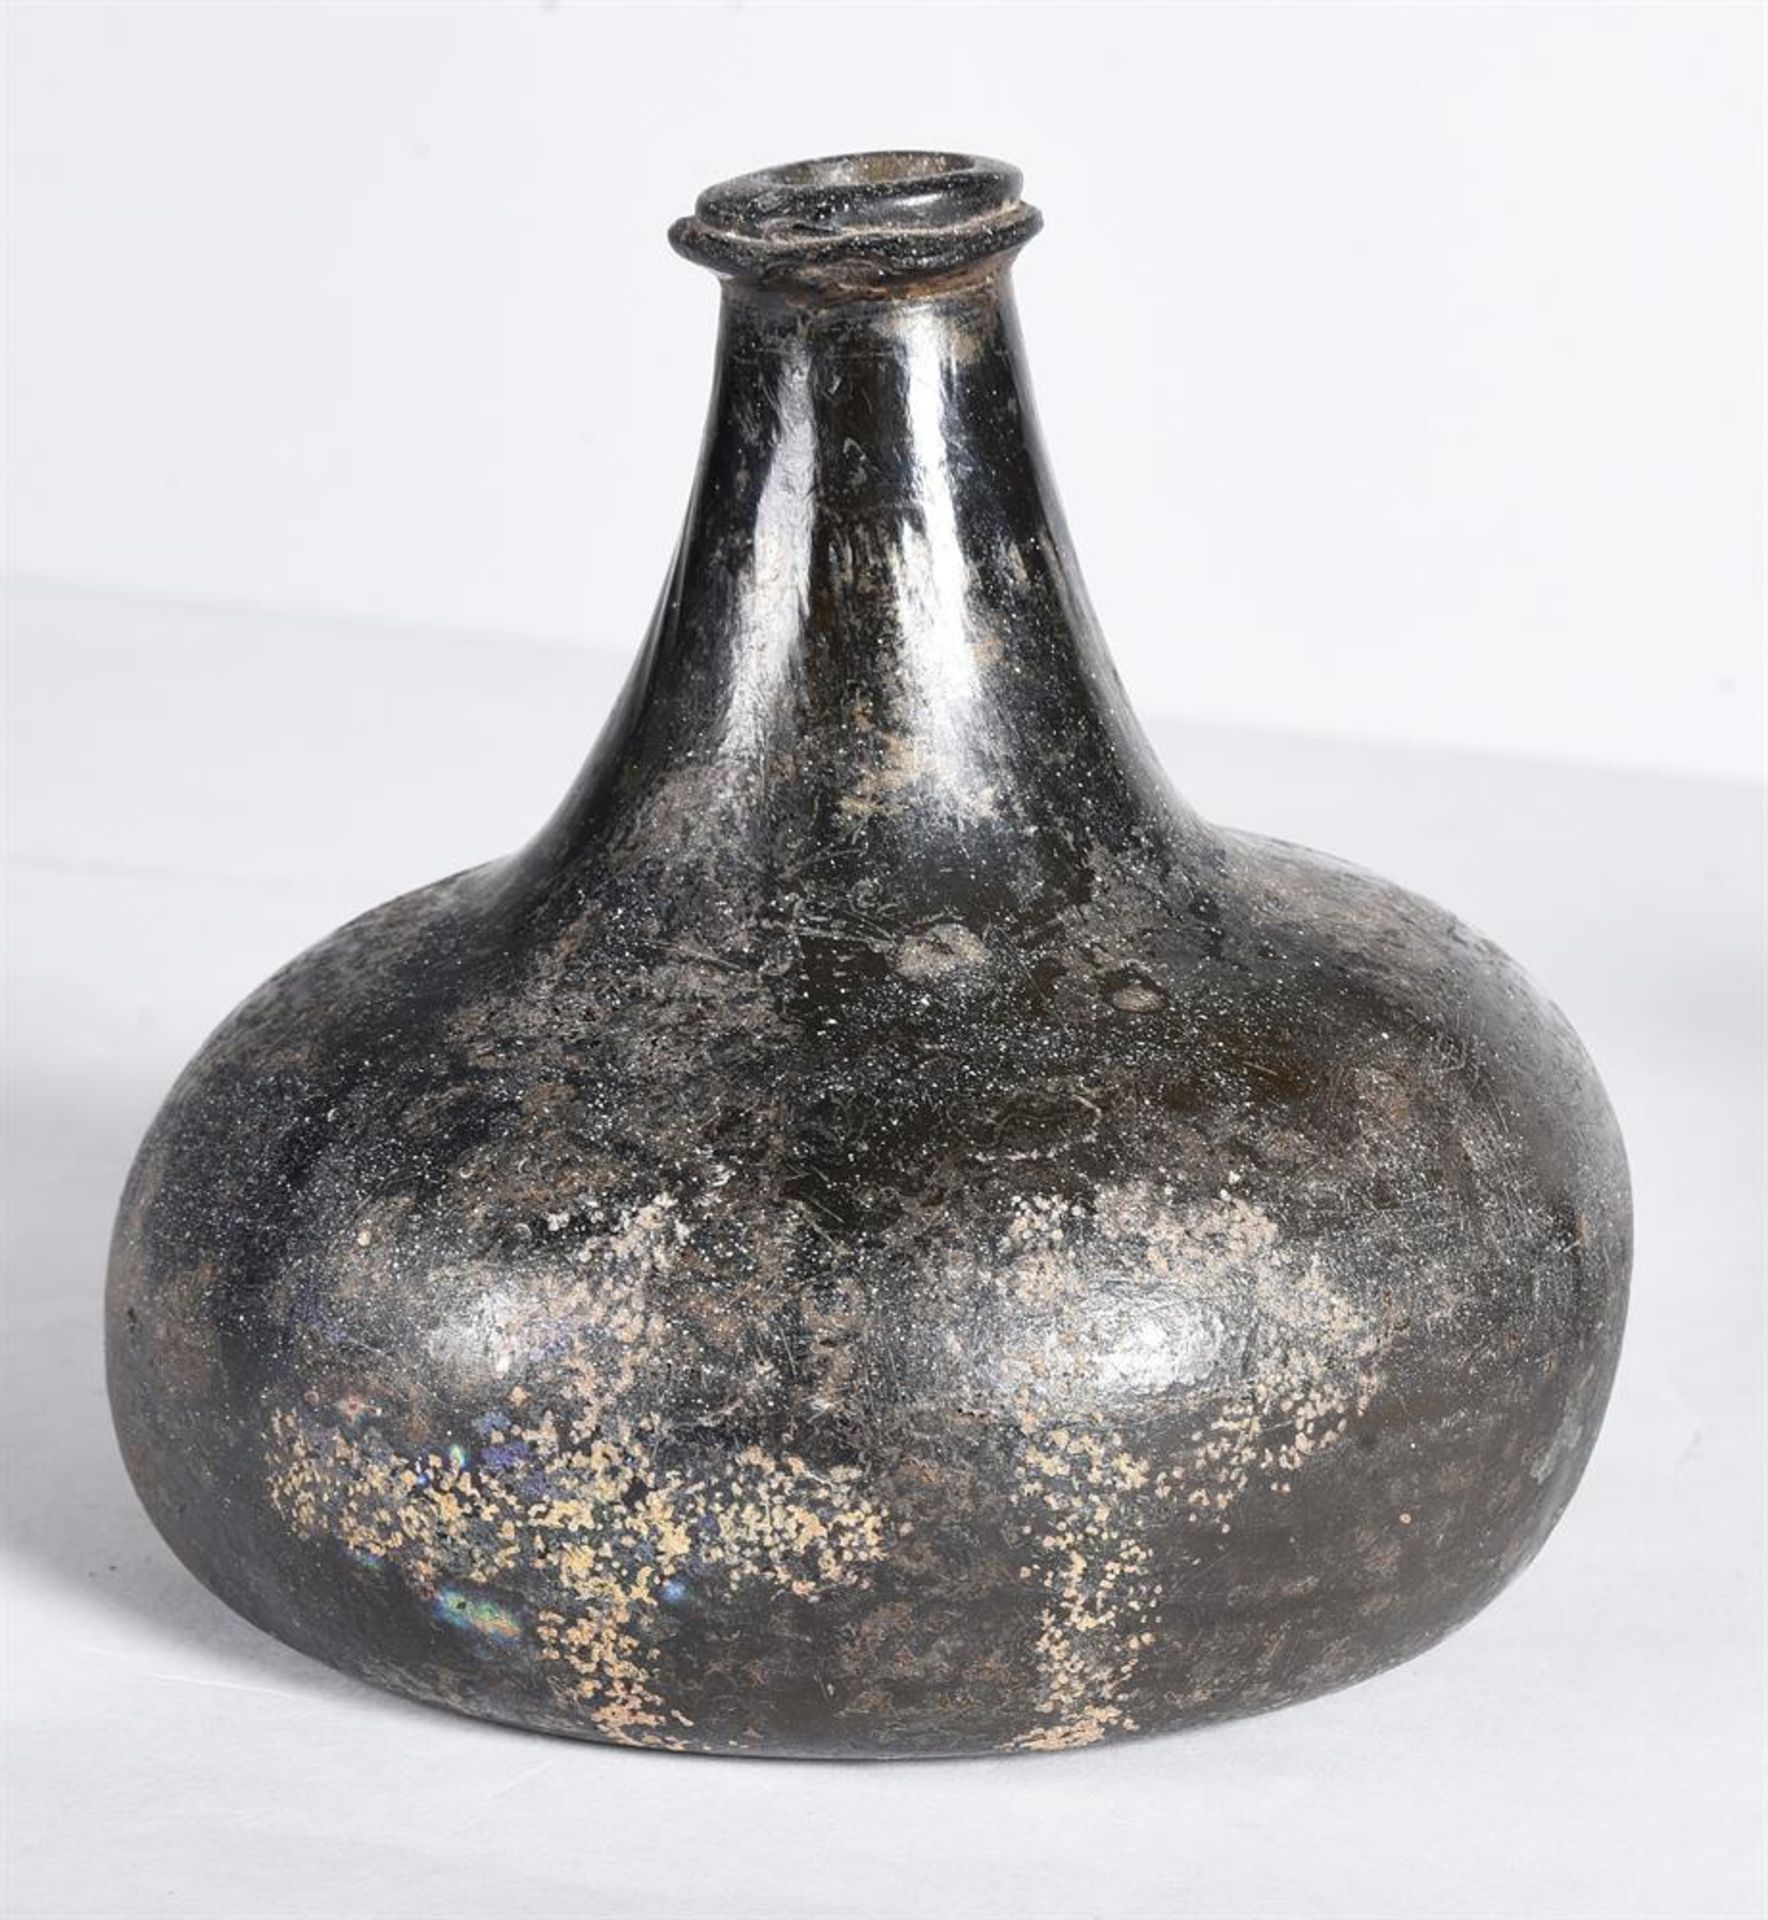 TWO 'ONION' SHAPE WINE BOTTLES, ENGLISH, EARLY 18TH CENTURY - Image 3 of 4